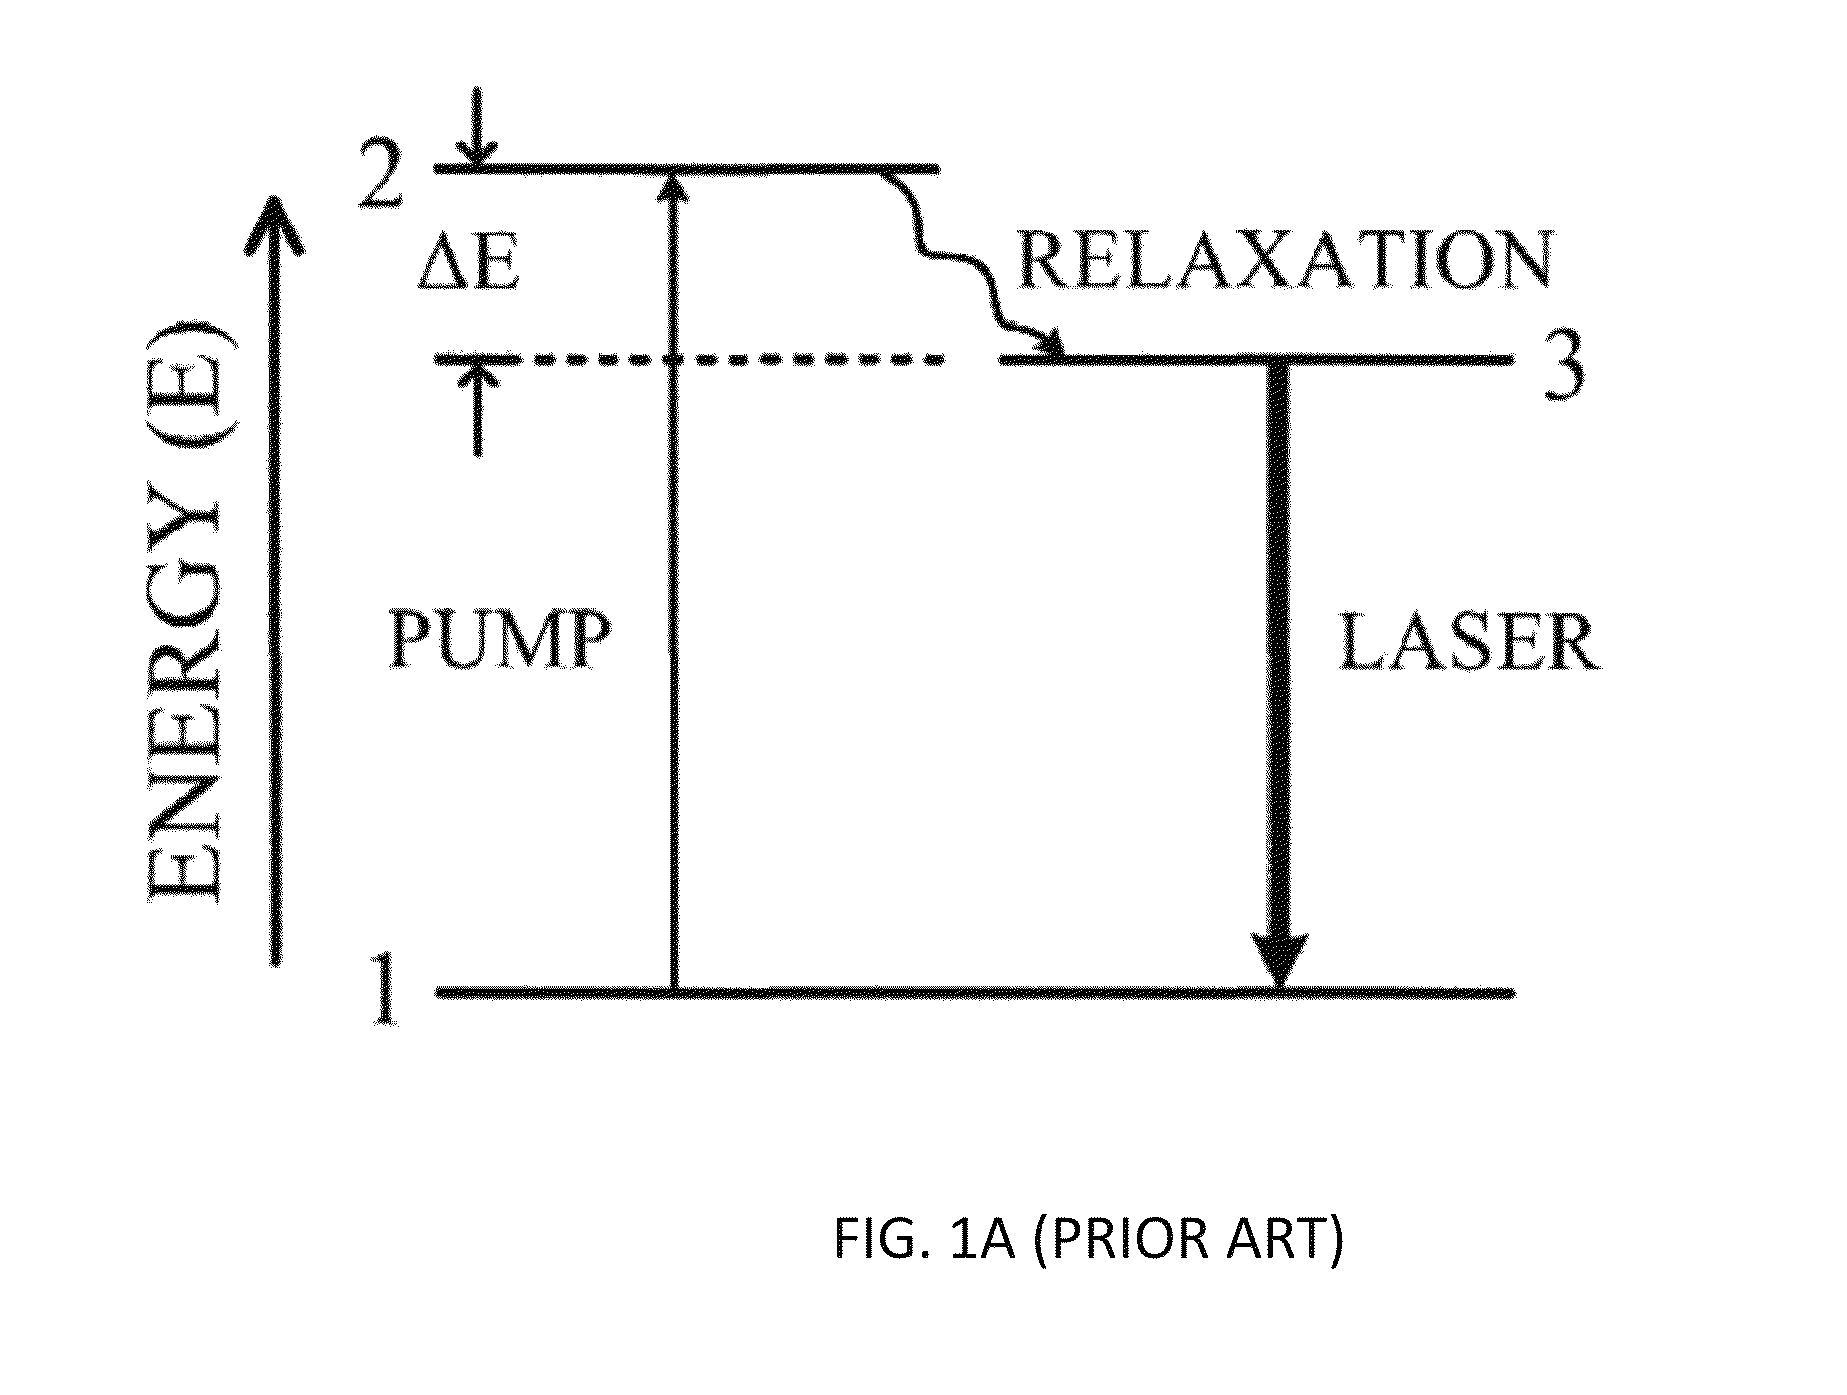 Dual channel pumping method laser with metal vapor and noble gas medium